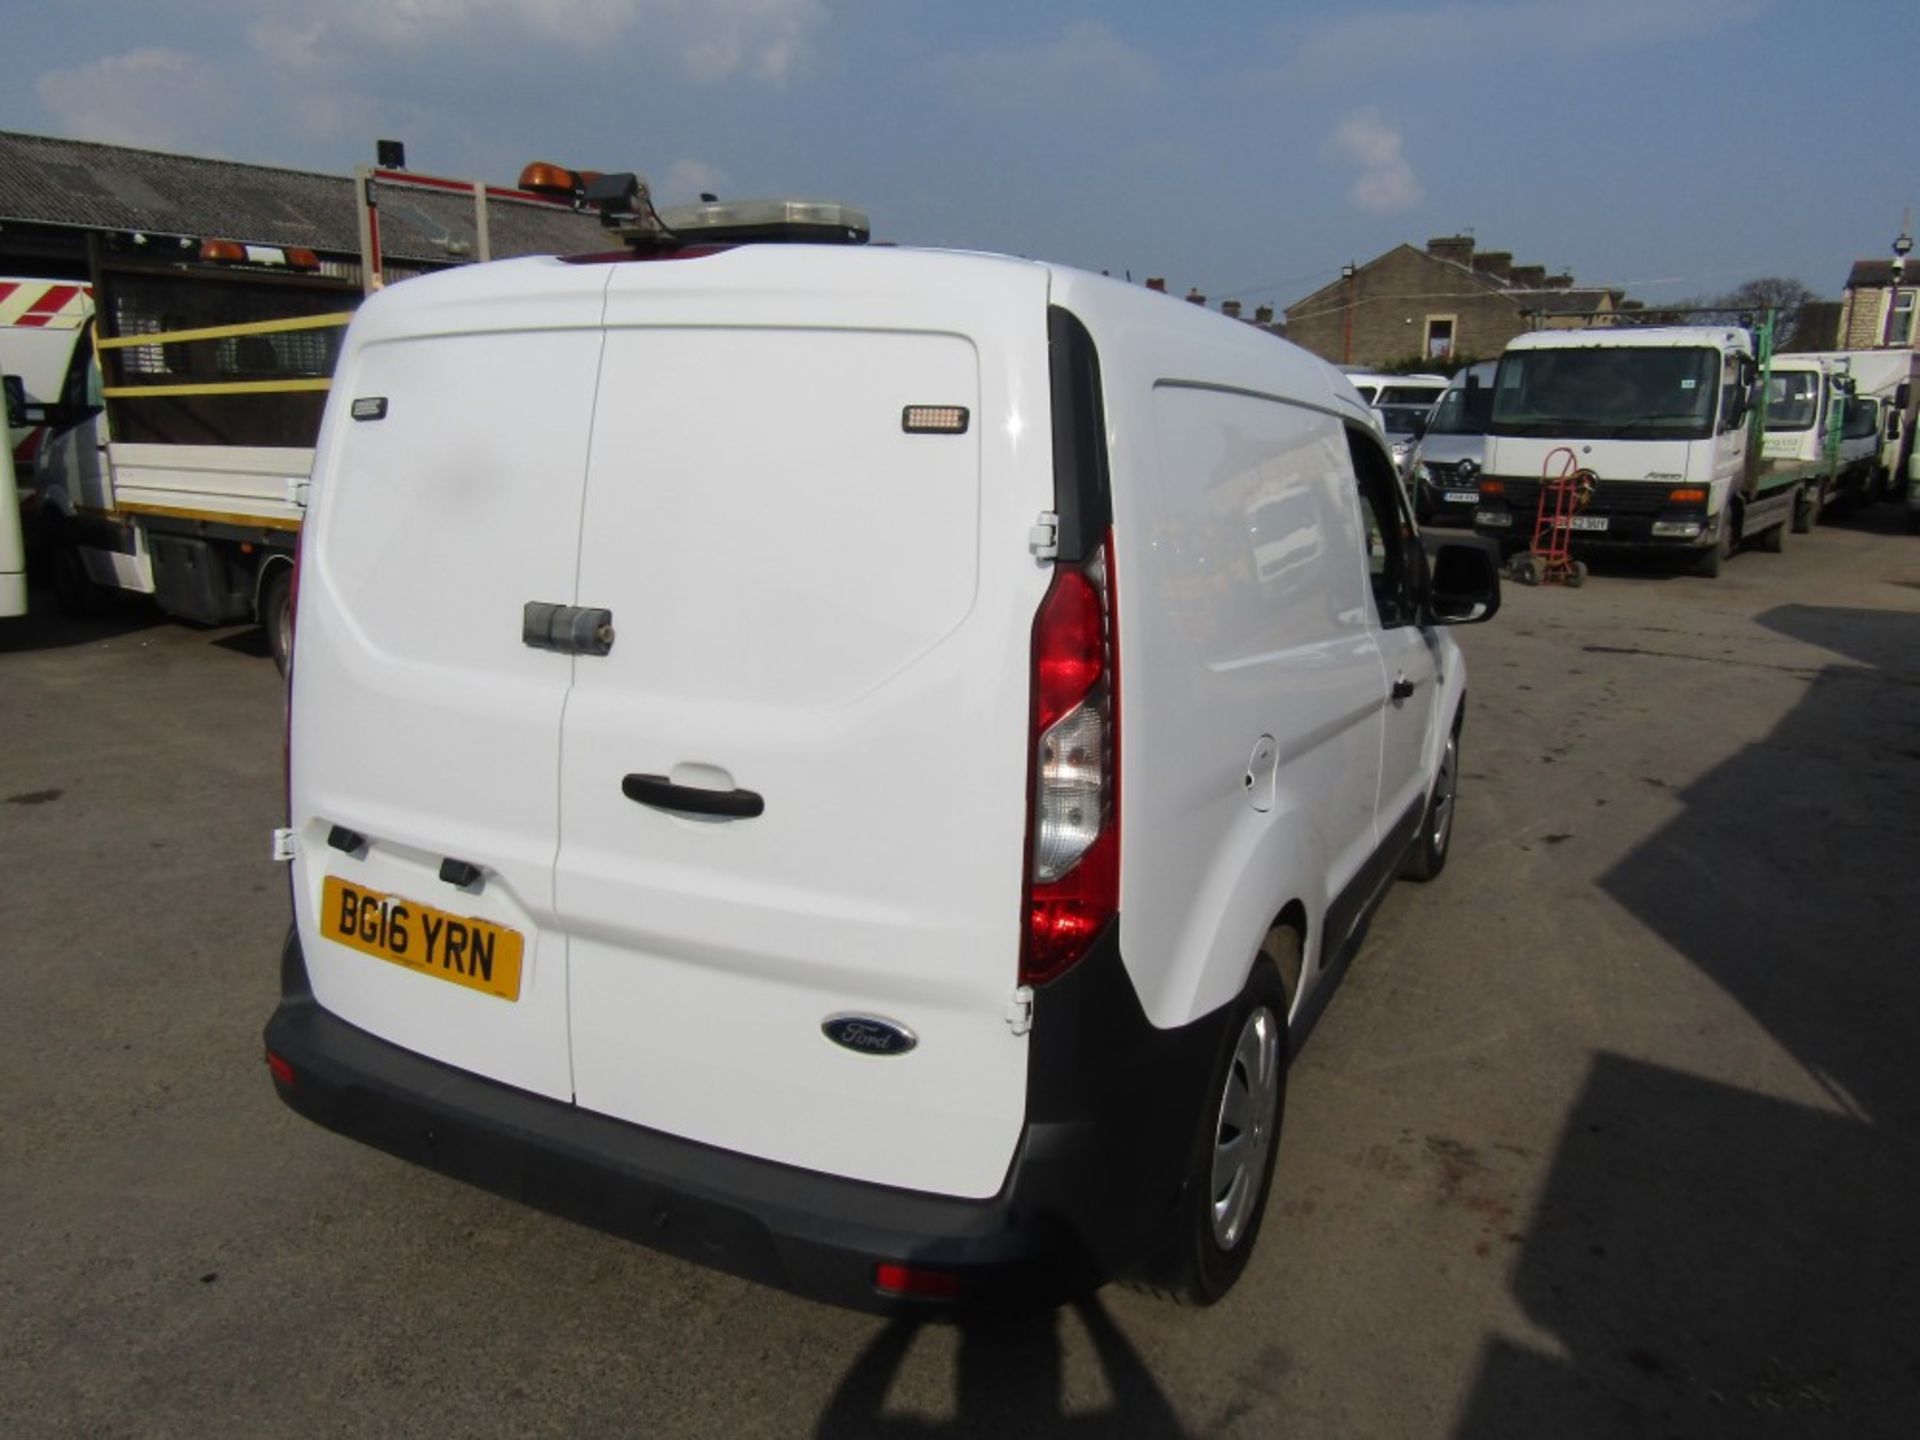 16 reg FORD TRANSIT CONNECT 200 ECONETIC, AIR CON, SECURITY LOCKS, 1ST REG 04/16, 105503M WARRANTED, - Image 4 of 7